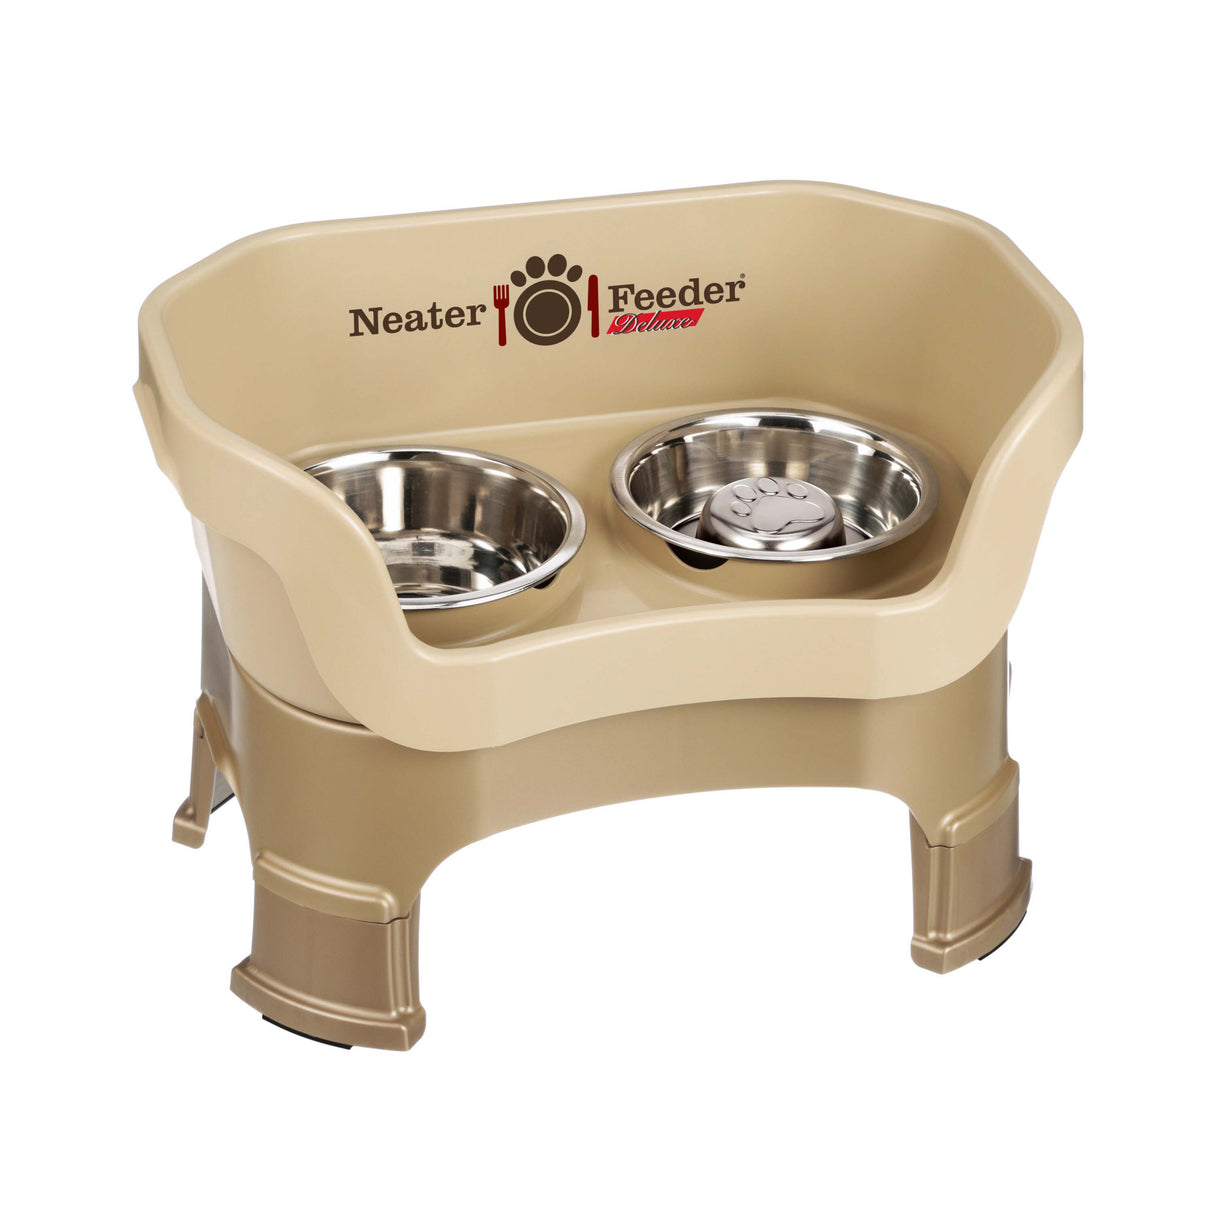 Cappuccino medium DELUXE Neater Feeder with Stainless Steel Slow Feed Bowl with leg extensions